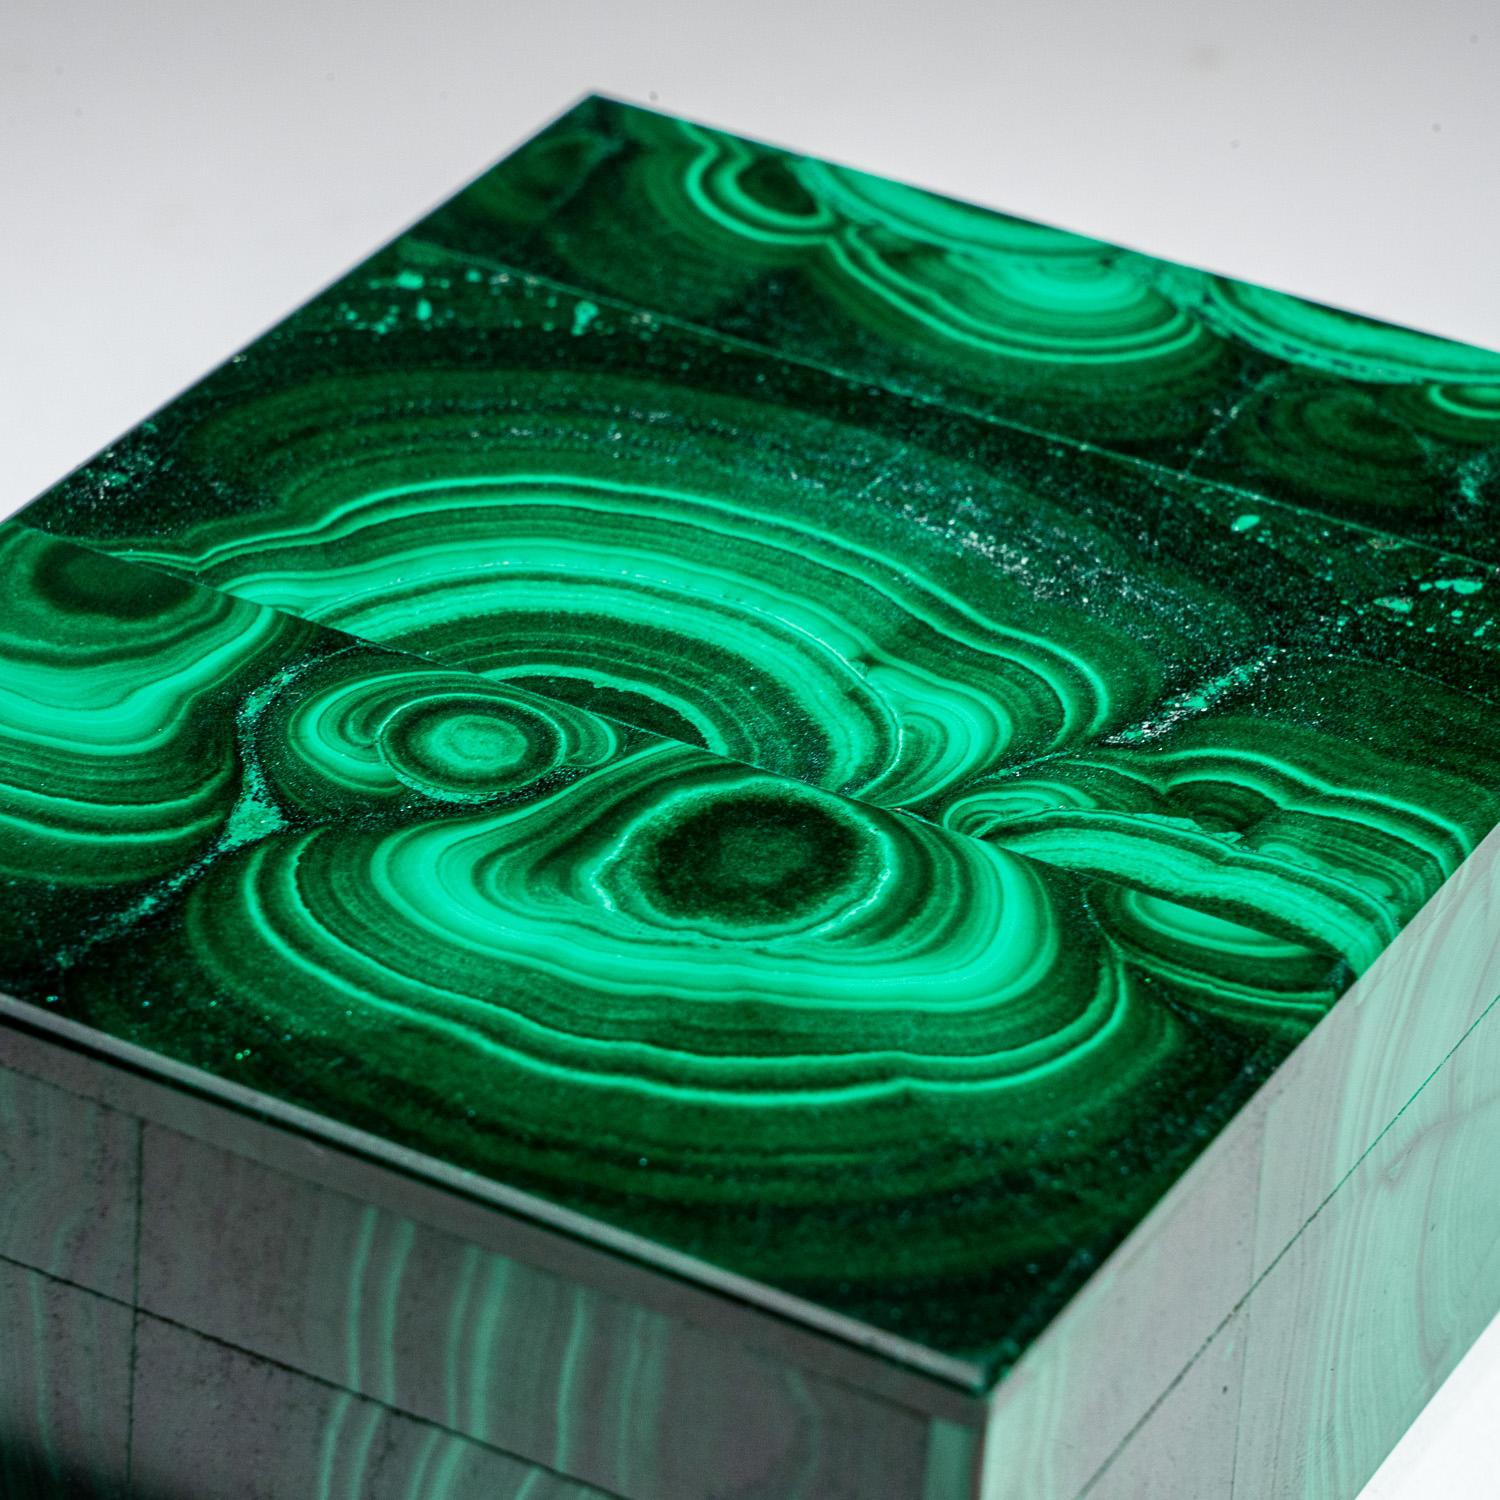 Beautiful rectangle jewelry box handmade from the finest top grade natural bulls eye Malachite from Congo, with rich translucent to transparent green color. The box has been hand polished to a mirror finish. The lid has a piano hinge opening to